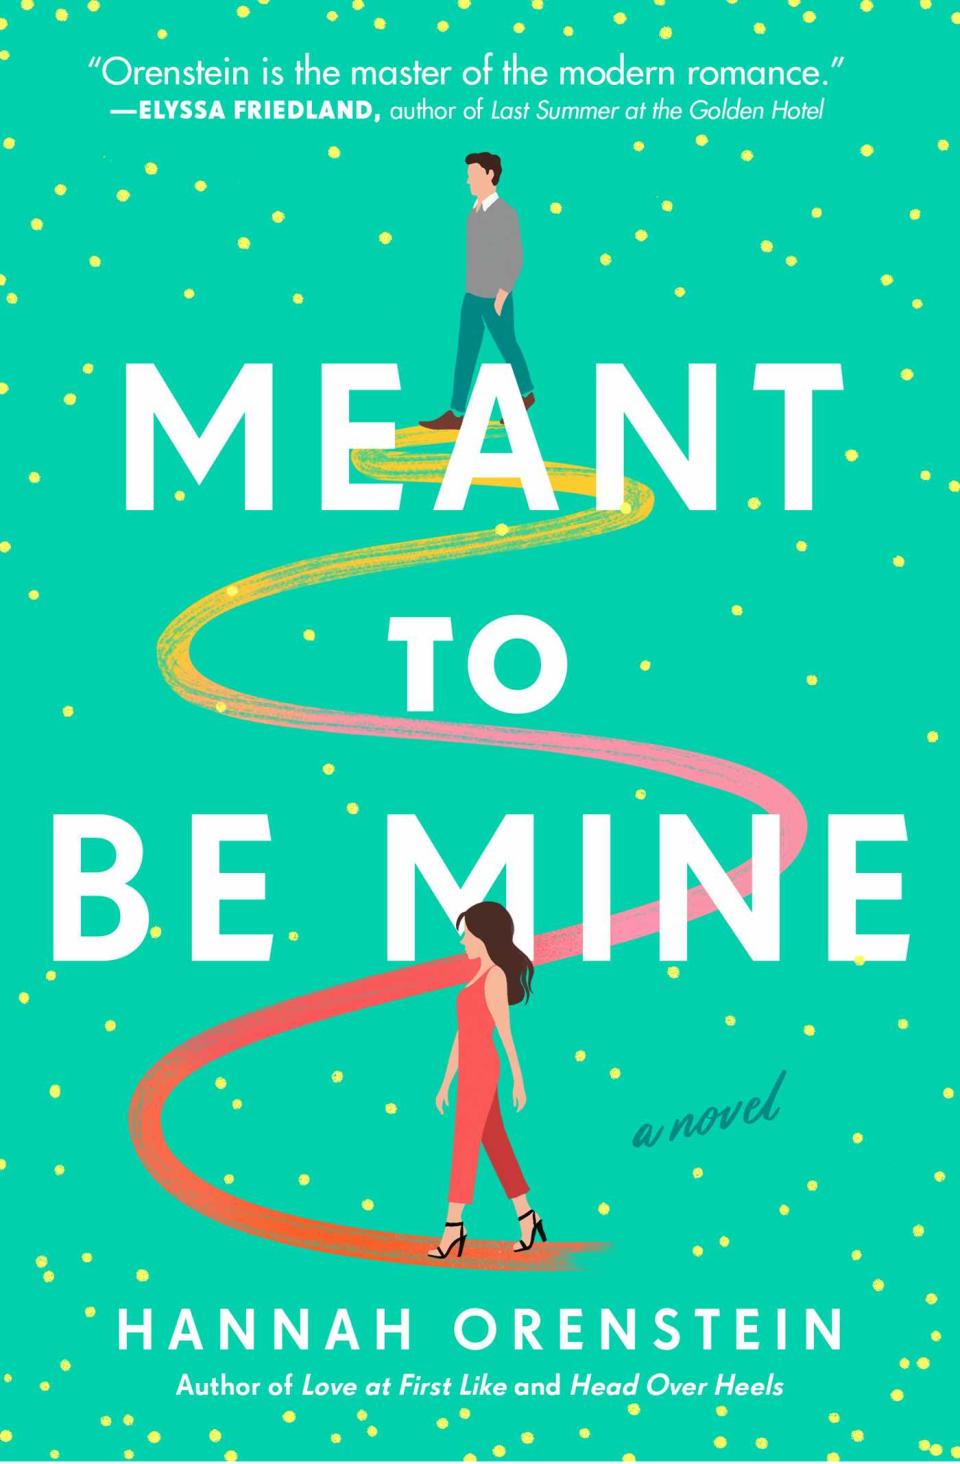 "Meant to Be Mine," by Hannah Orenstein